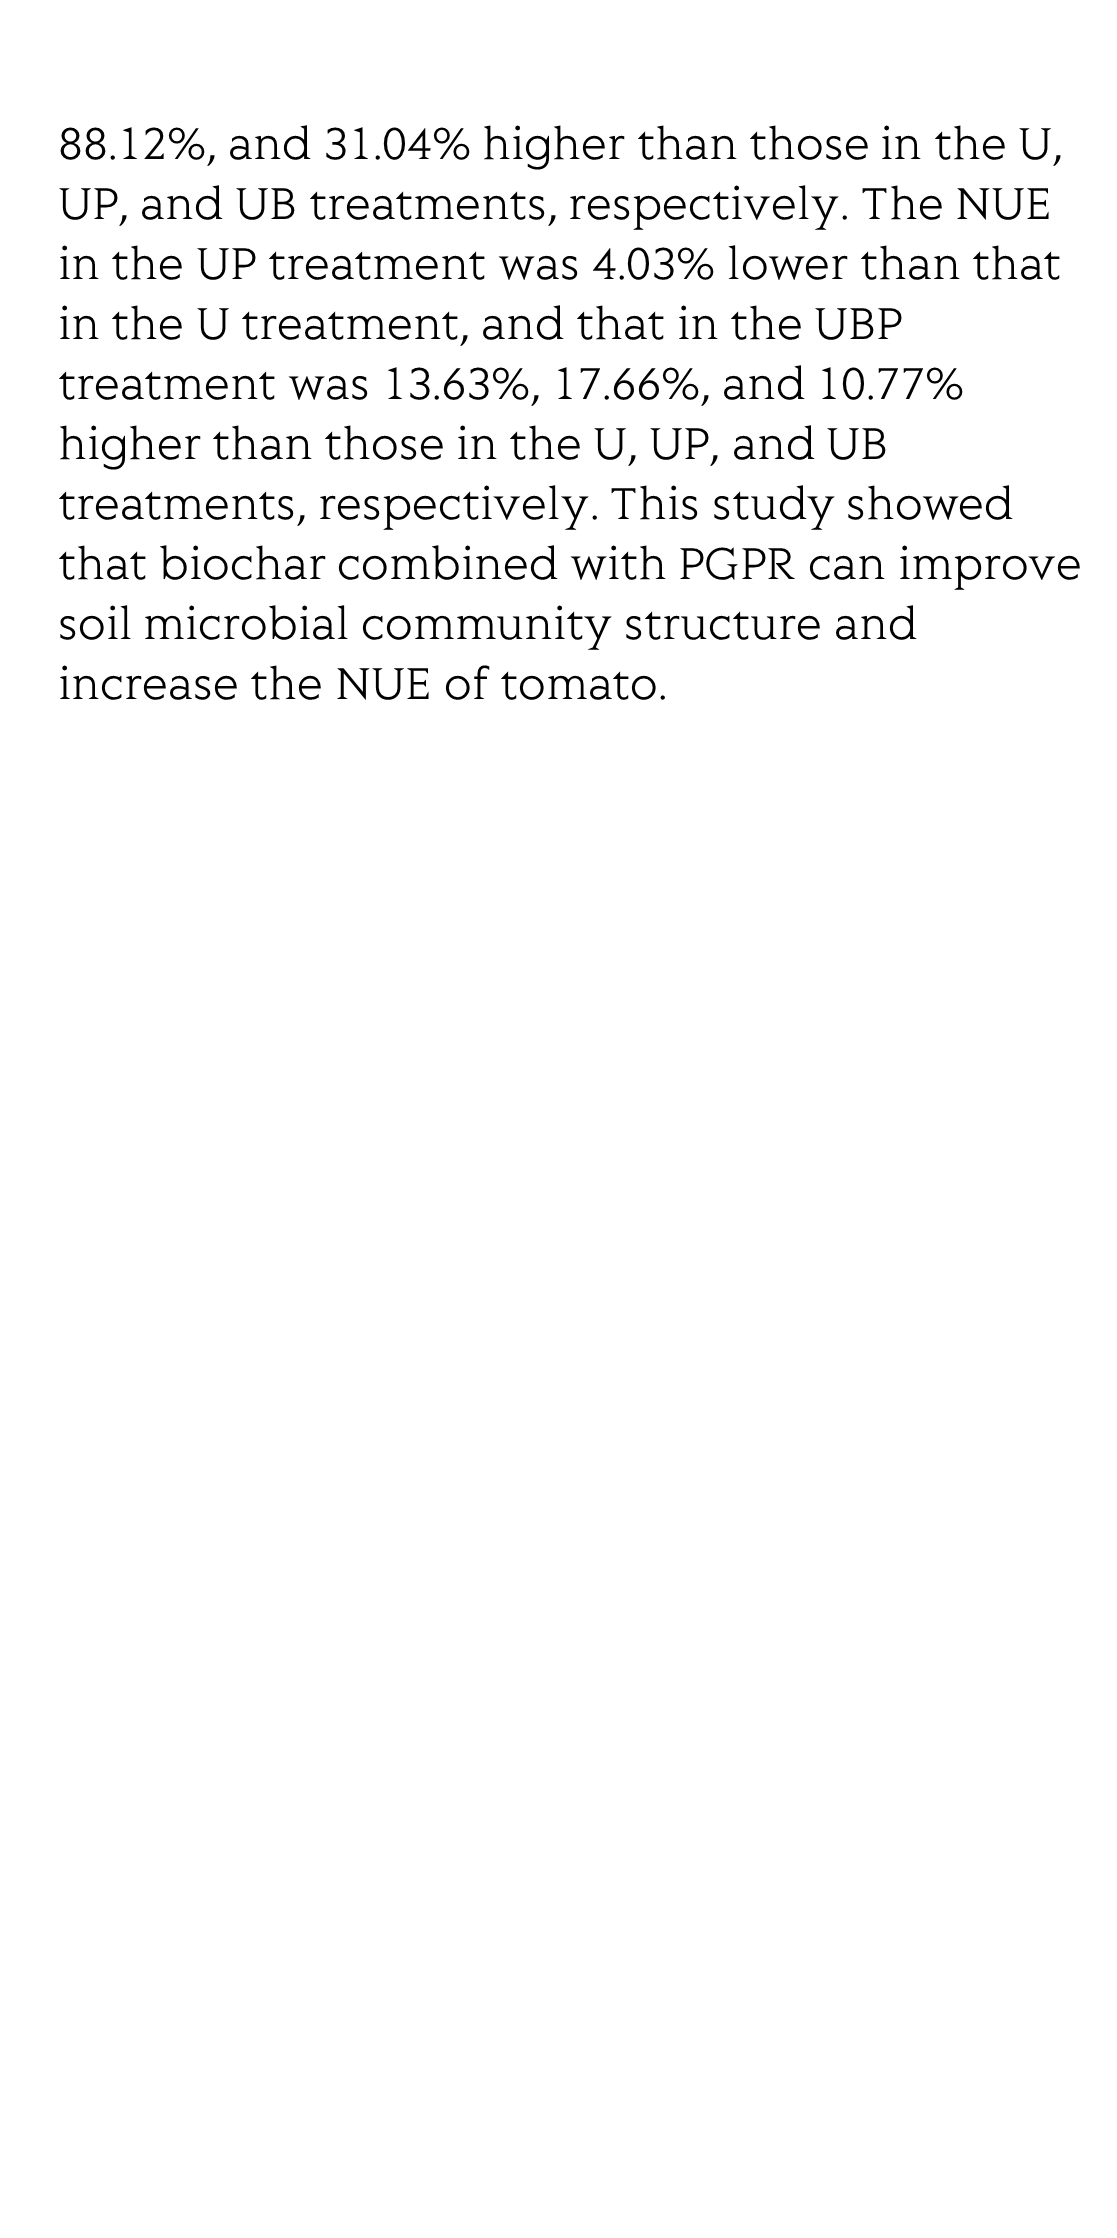 Effect of biochar applied with plant growth-promoting rhizobacteria (PGPR) on soil microbial community composition and nitrogen utilization in tomato_3